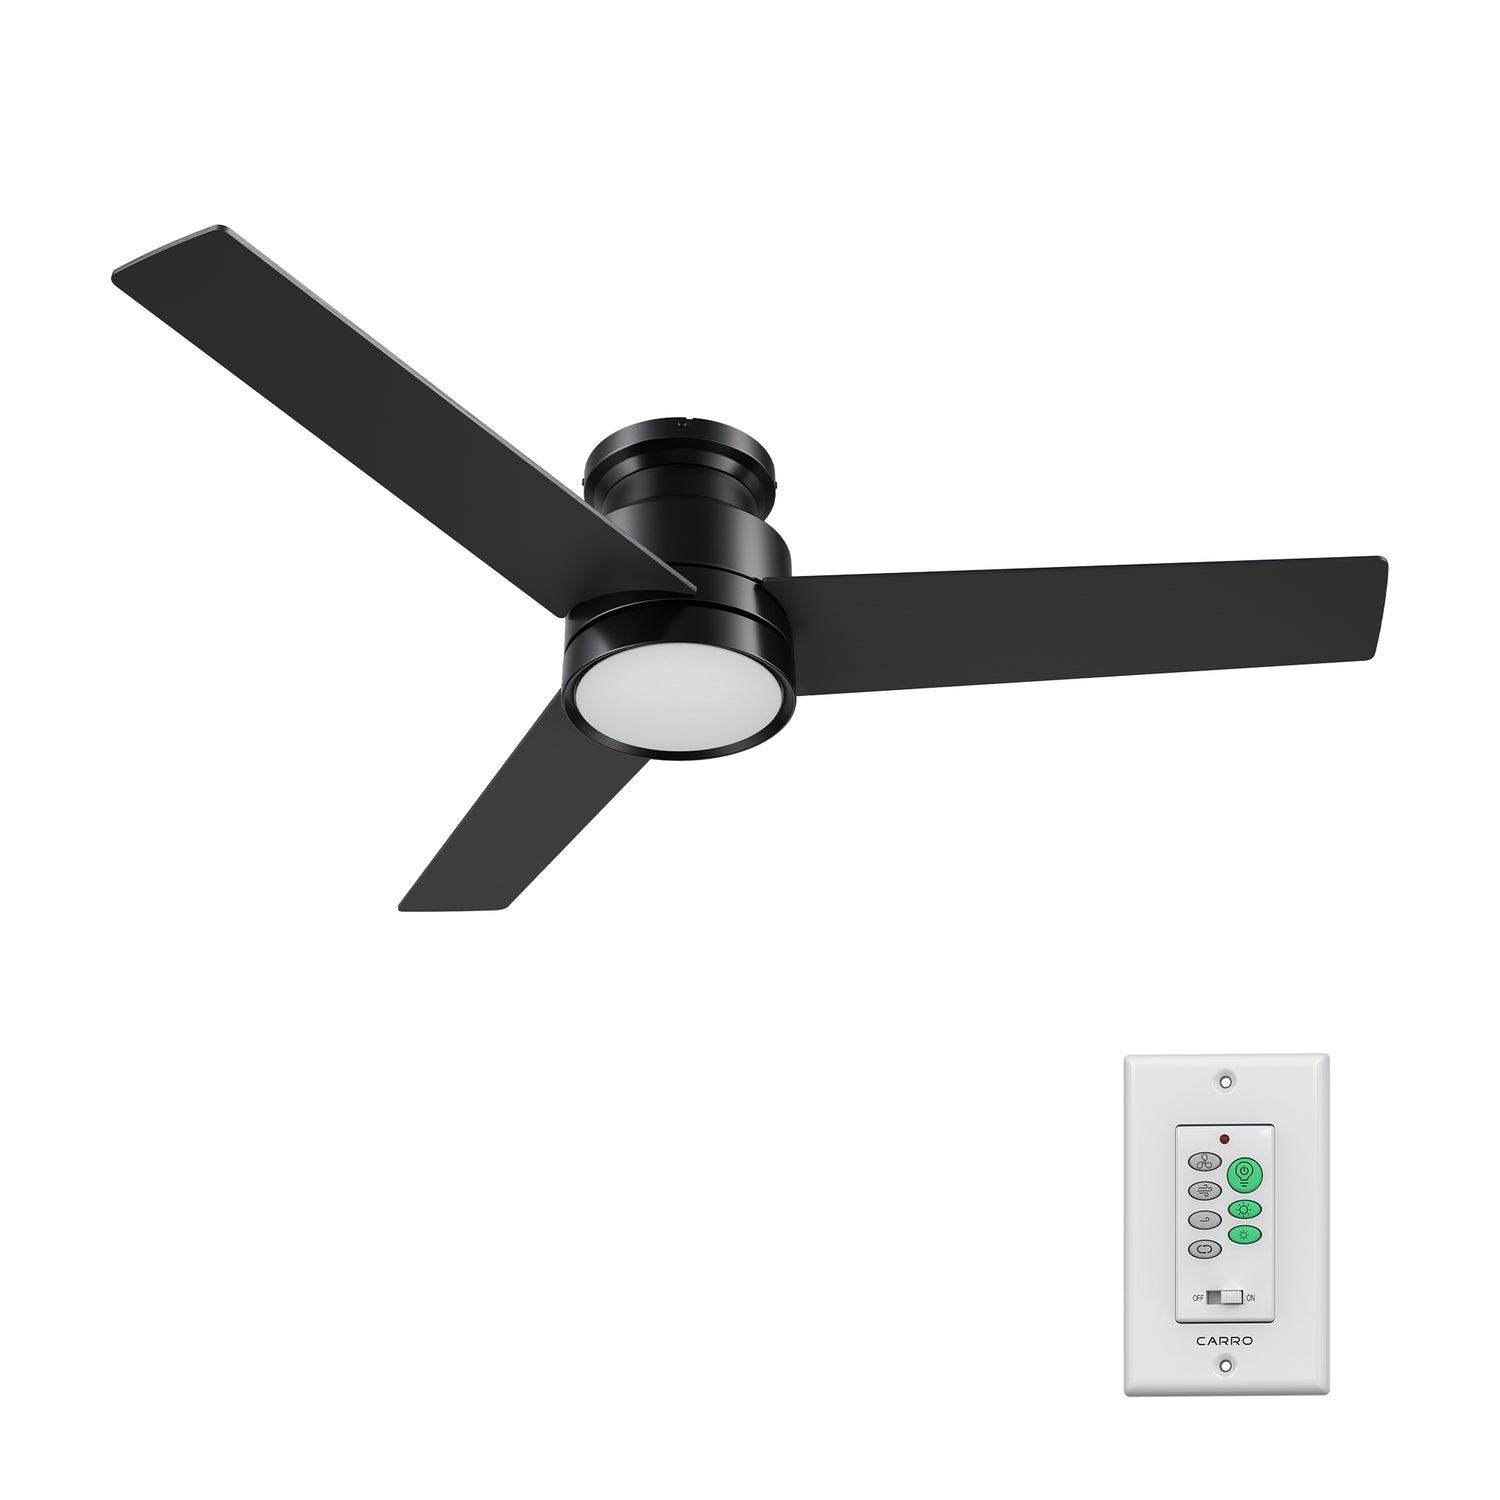 Low profile ceiling fan in black with wall switch control allows you to operate remotely to turn the fan on and off, change the light, adjust the 10-speed choice, reversible direction etc. 